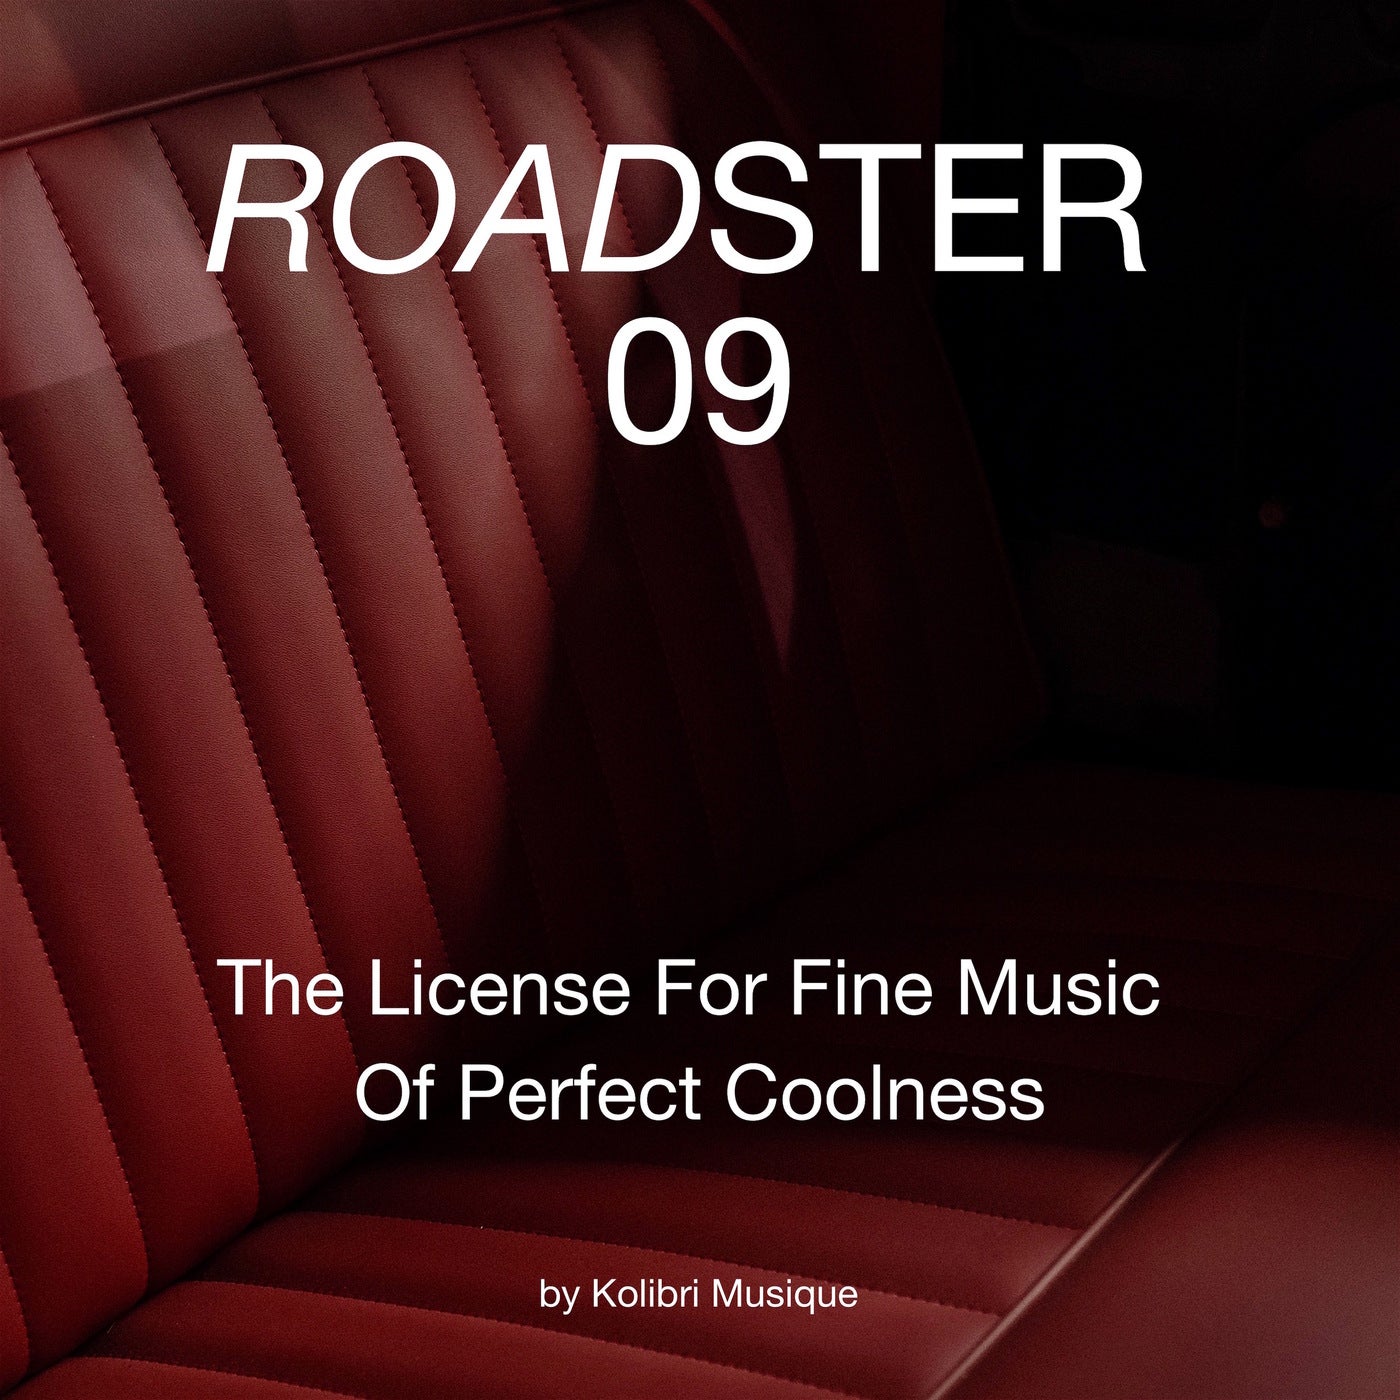 Roadster 09 - The License for Fine Music of Perfect Coolness (Presented by Kolibri Musique)